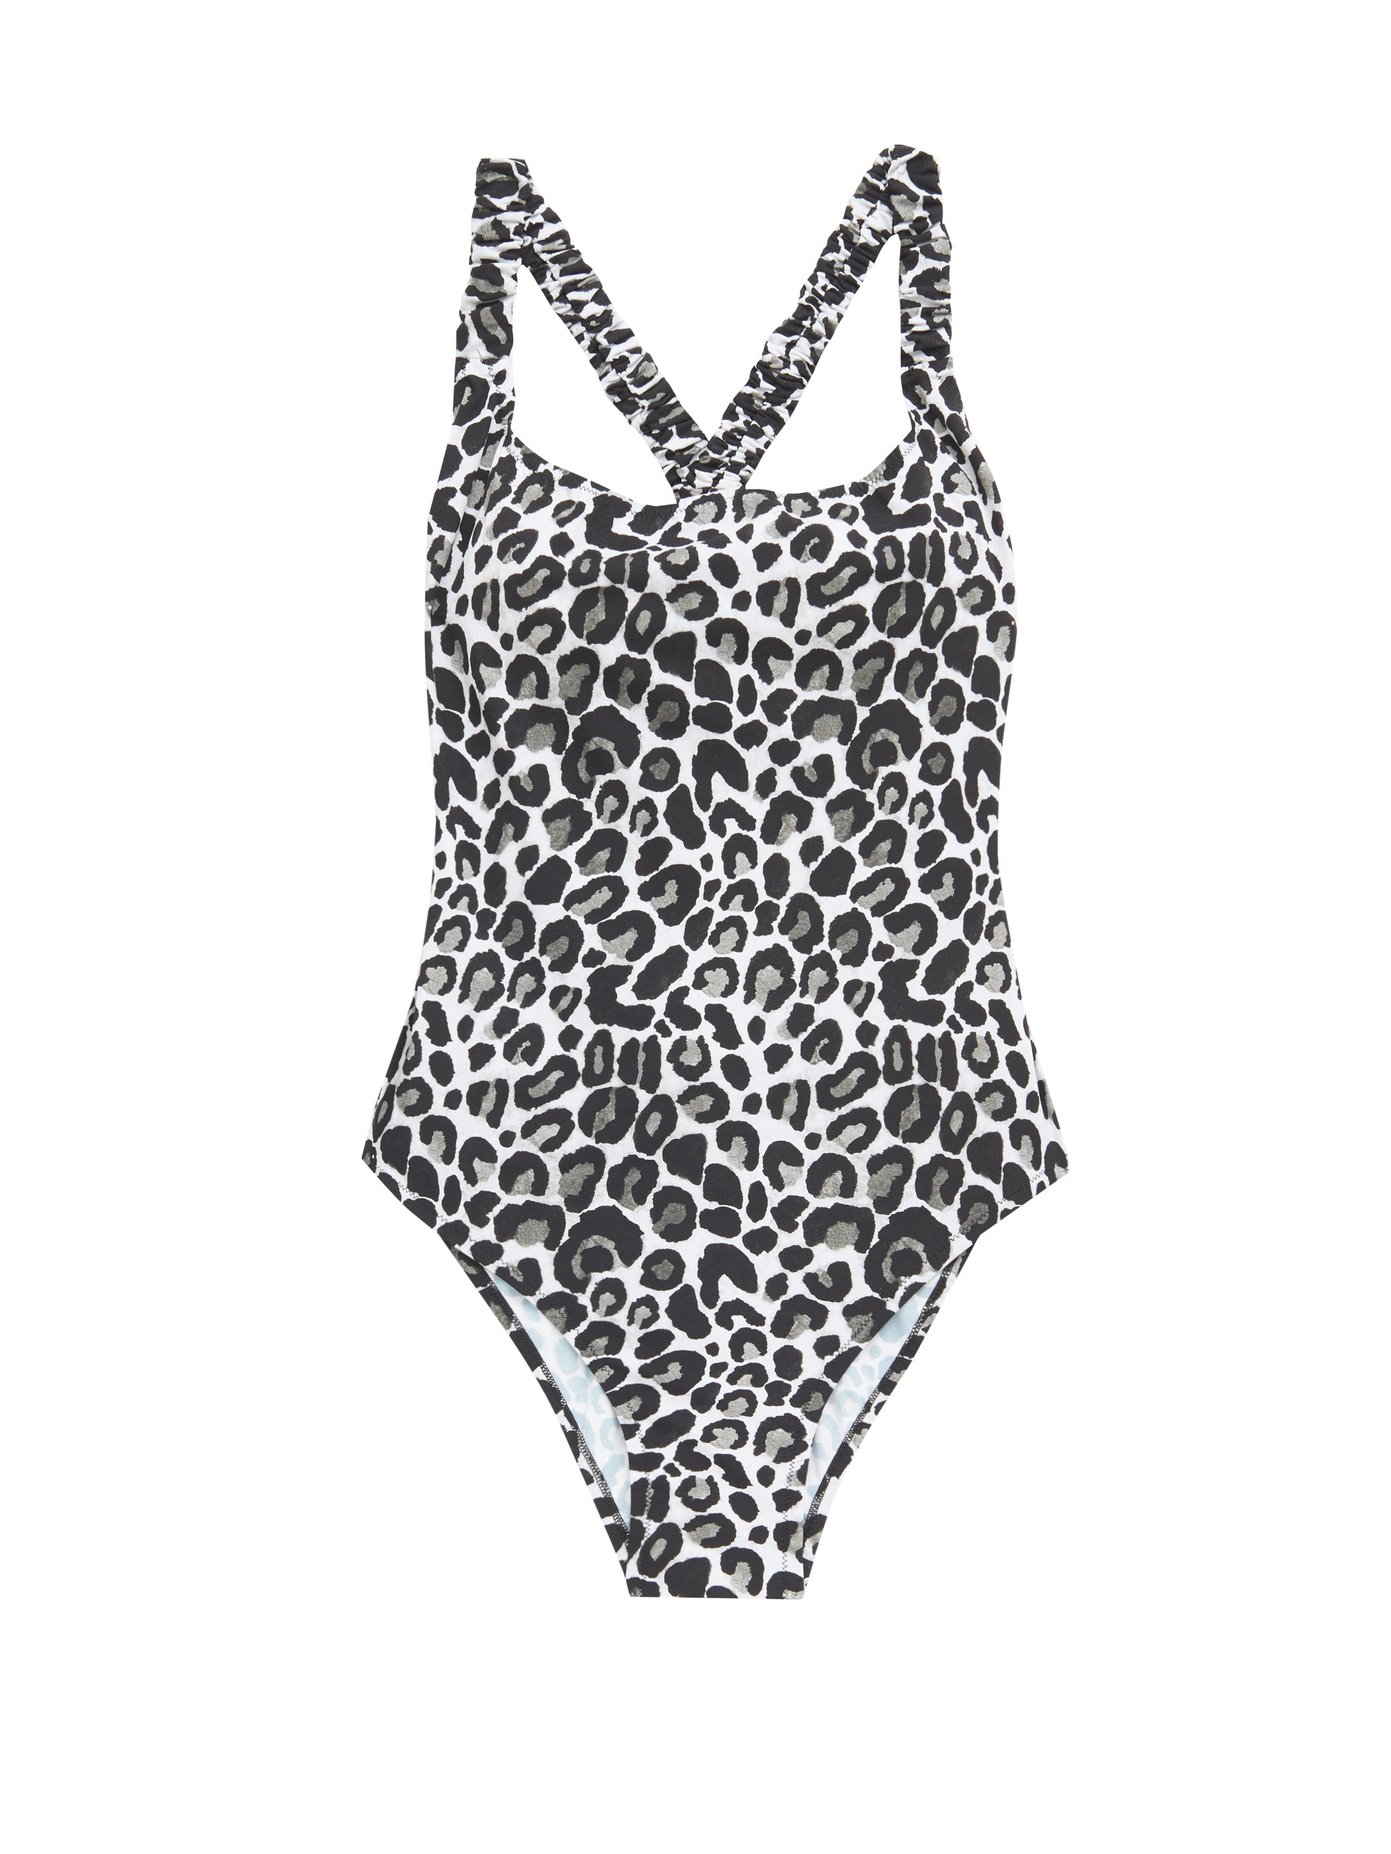 black and white leopard print swimsuit